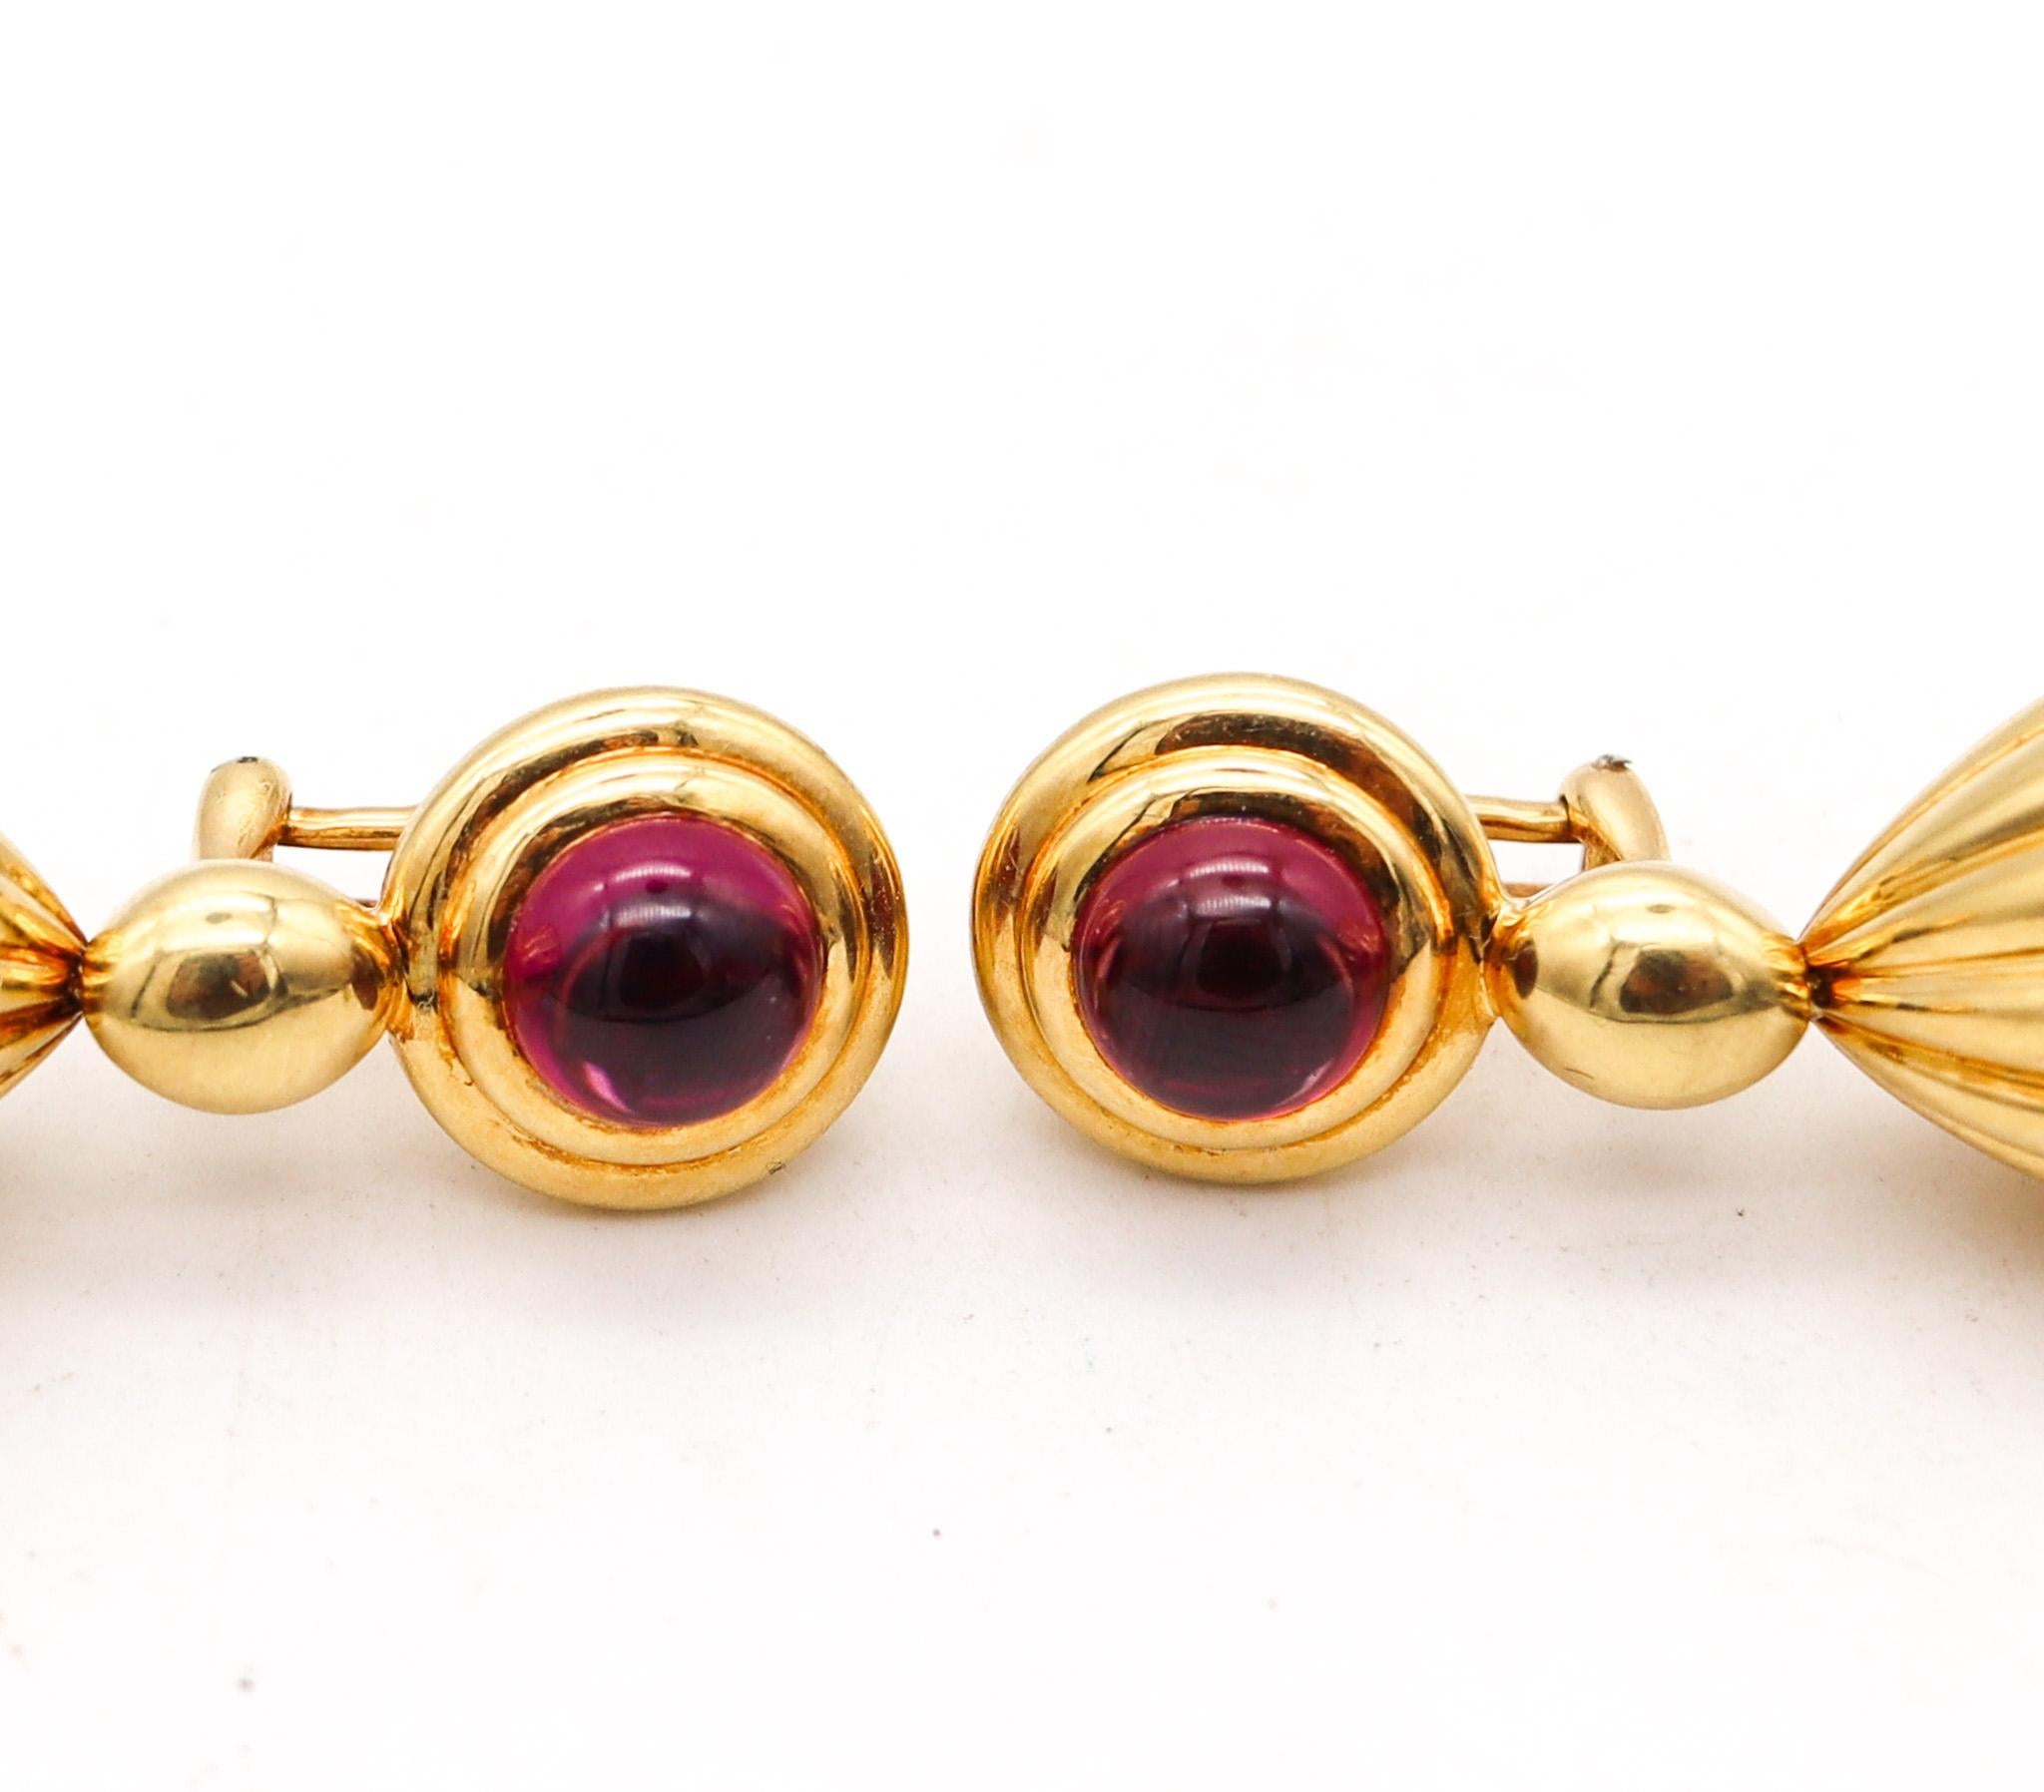 Modernist British Dangle Drop Earrings In 18Kt Gold With 17.46 Ctw Diamonds And Rhodolite For Sale